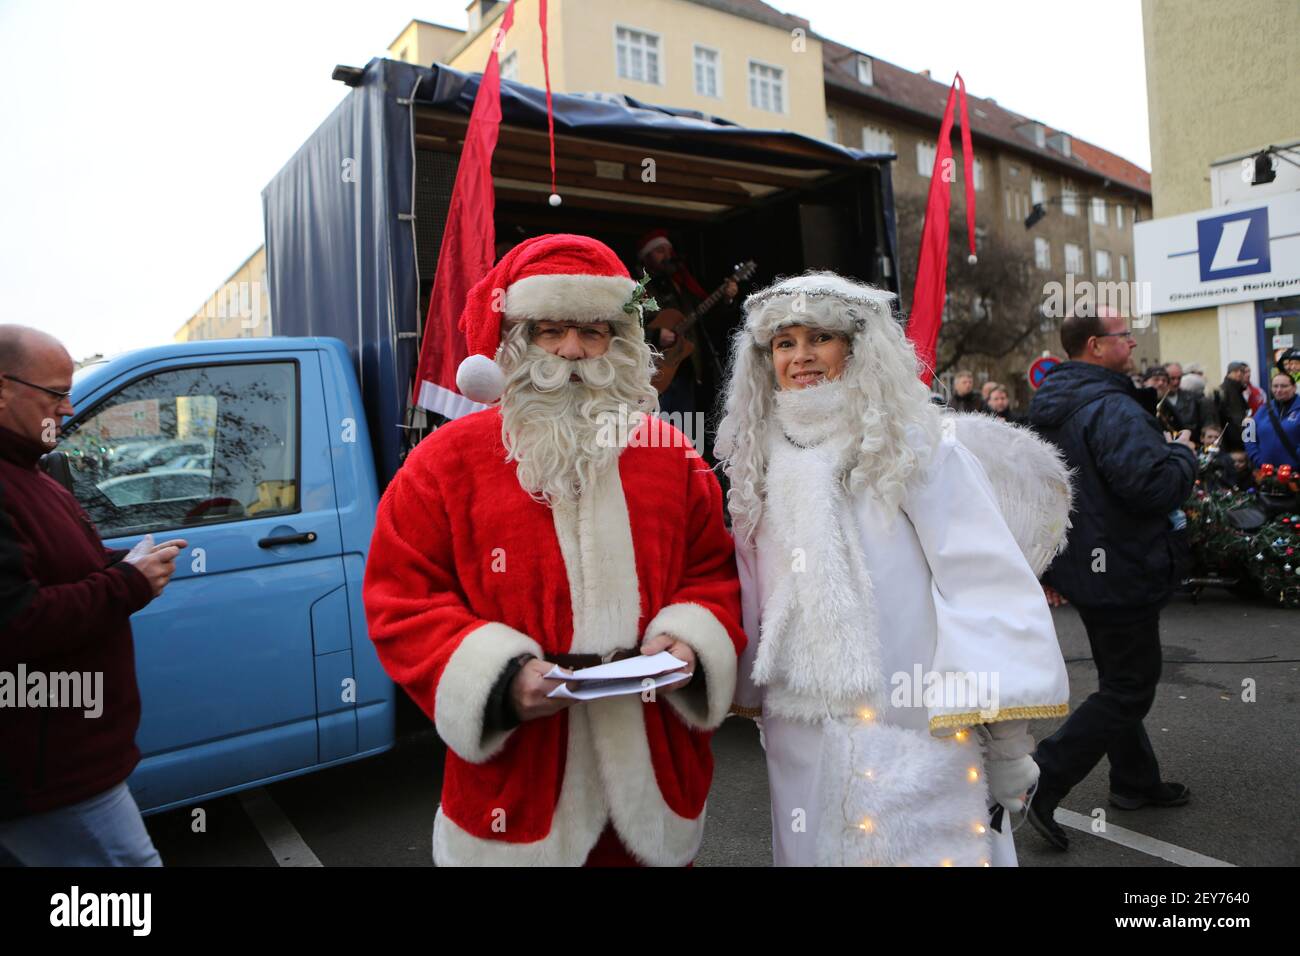 DECEMBER 13, 2014 - Berlin, Germany - Decorated motorcycles and bikers dressed as Santa Claus roam around Berlin to give gifts to the needy people; this is called the 'Christmas Berlin Bike Tour' (Photo by Simone Kuhlmey / Pacific Press/Sipa USA) Stock Photo